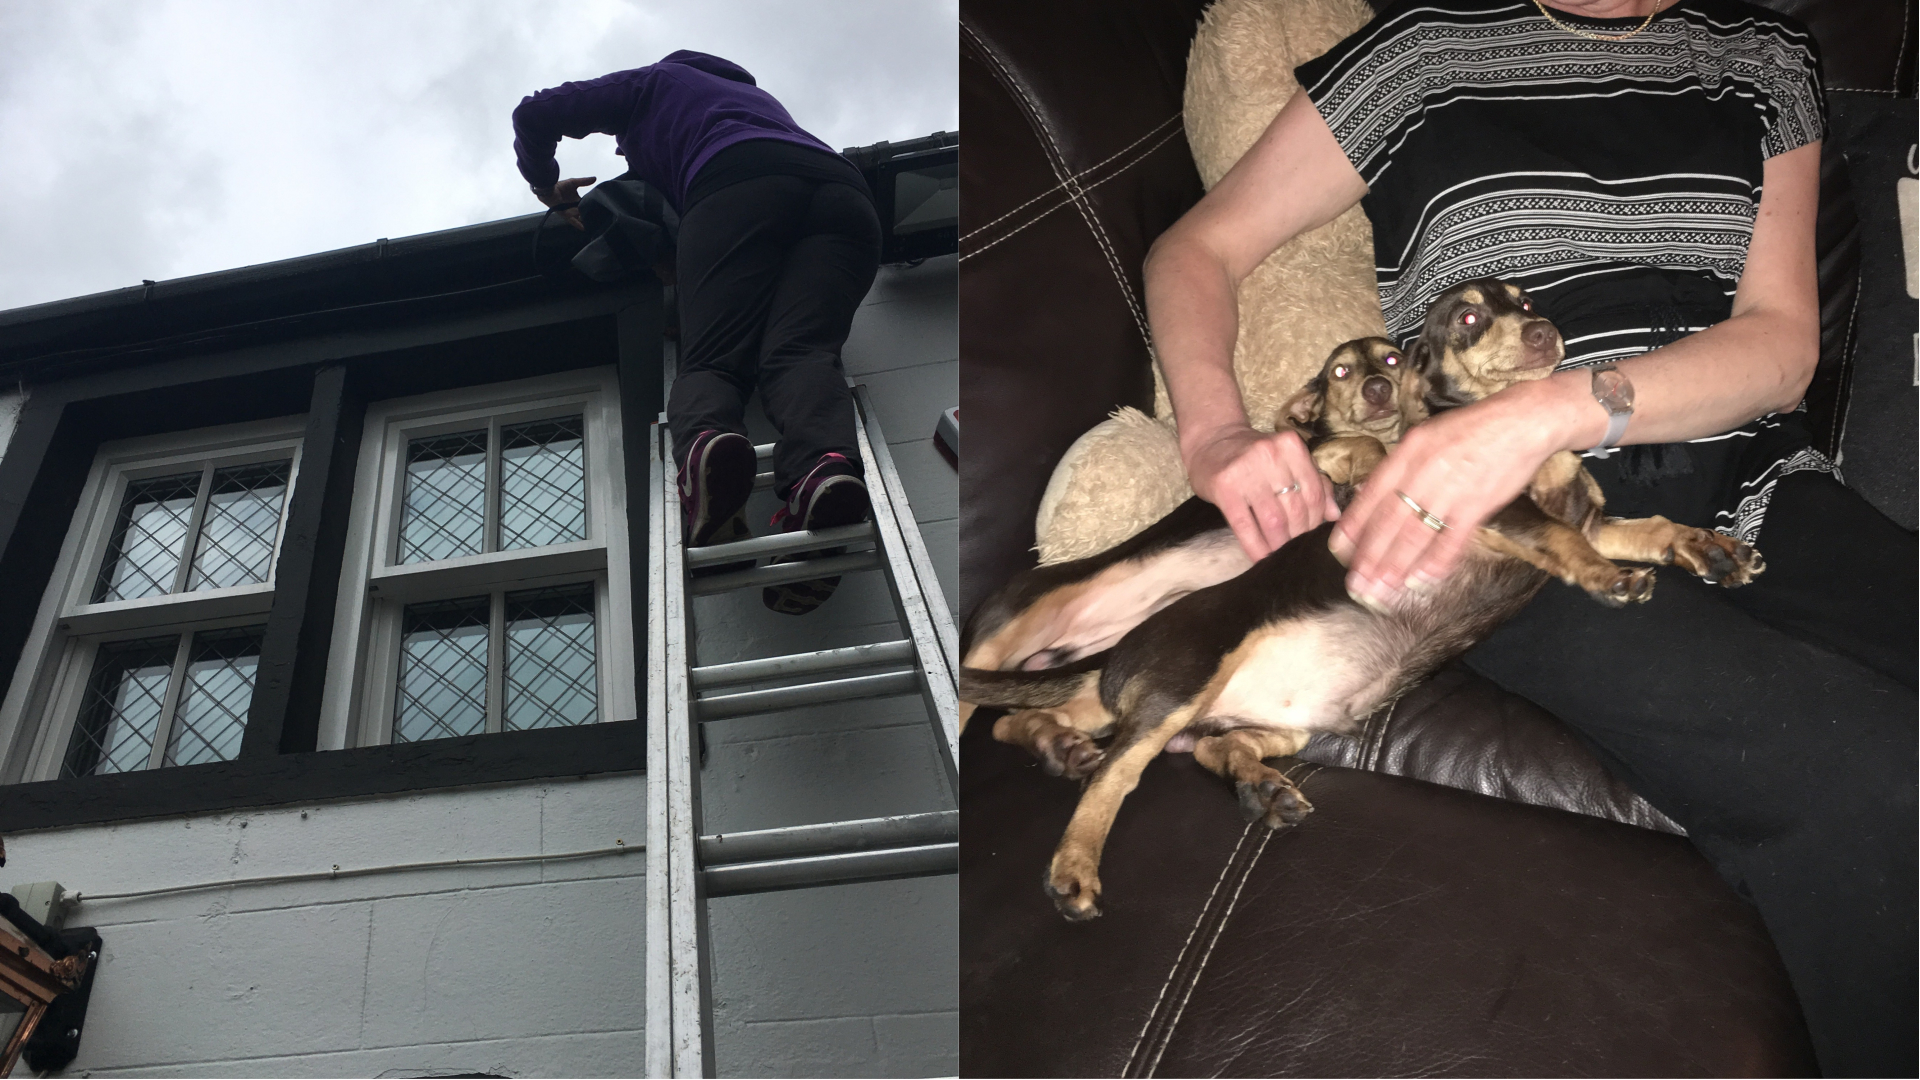 Two Dachshunds who were rescued from on top of a roof